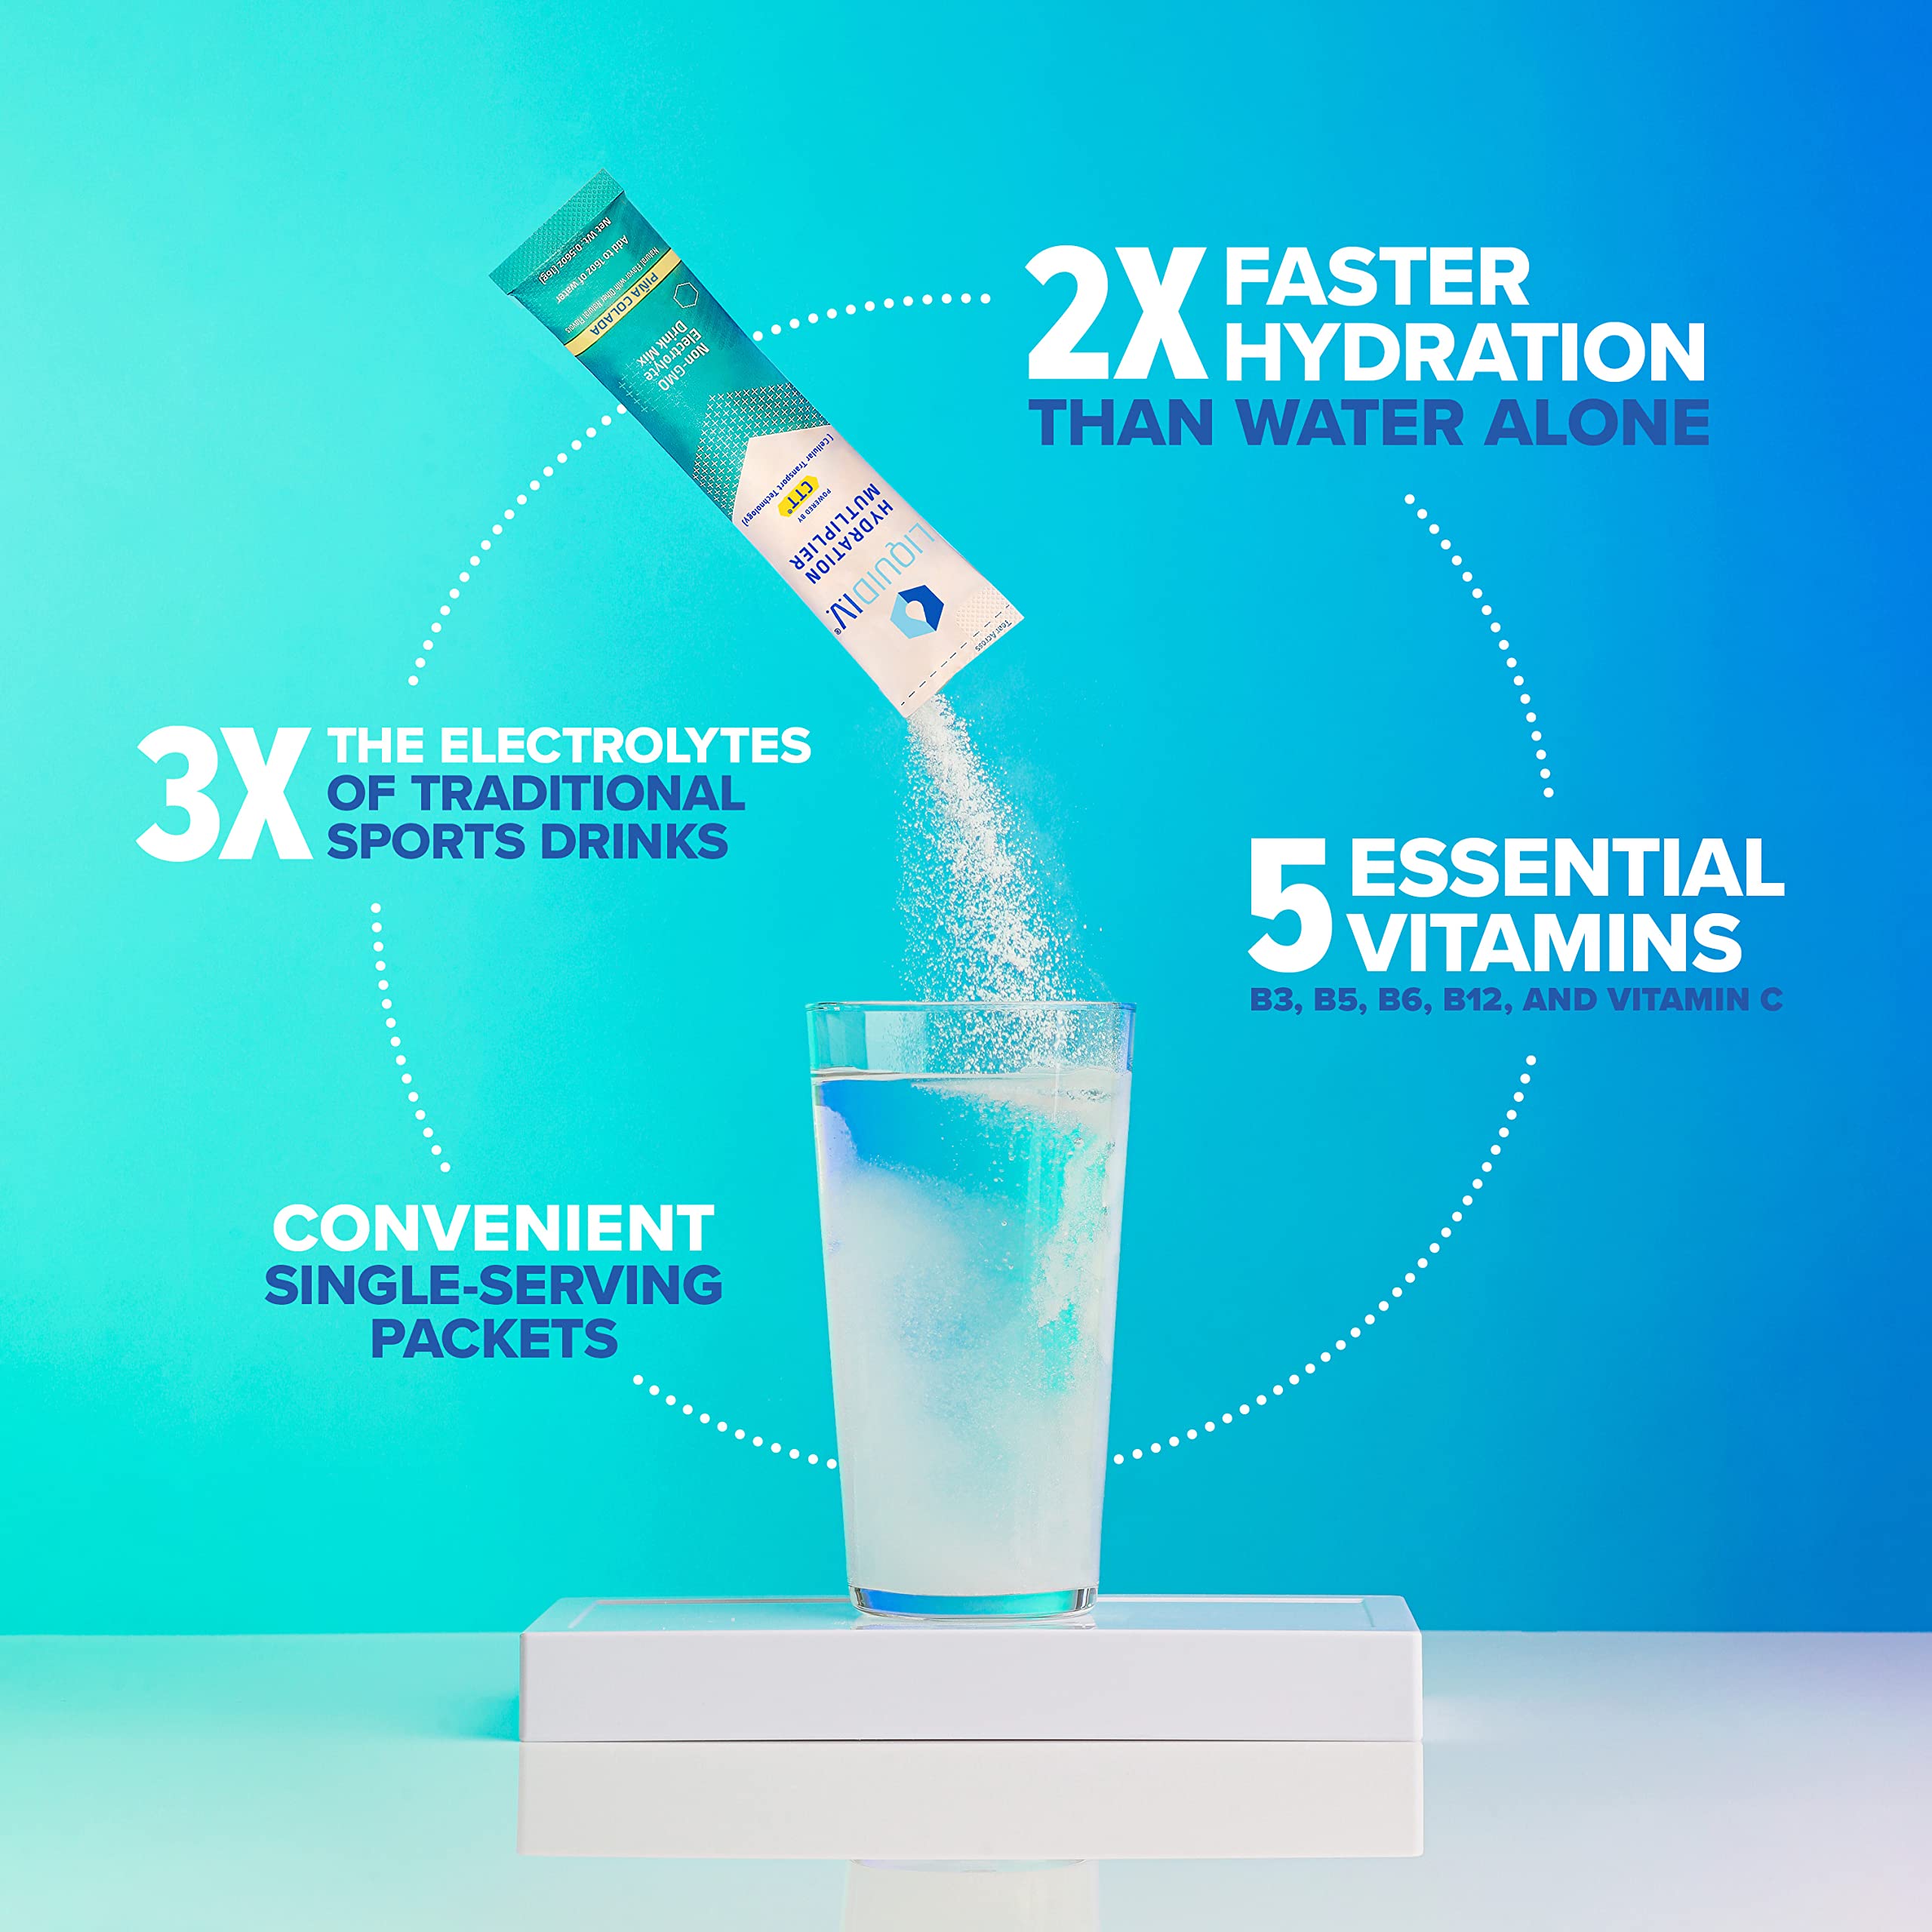 Liquid I.V. Hydration Multiplier - Pina Colada - Hydration Powder Packets | Electrolyte Drink Mix | Easy Open Single-Serving Stick | Non-GMO | 16 Sticks